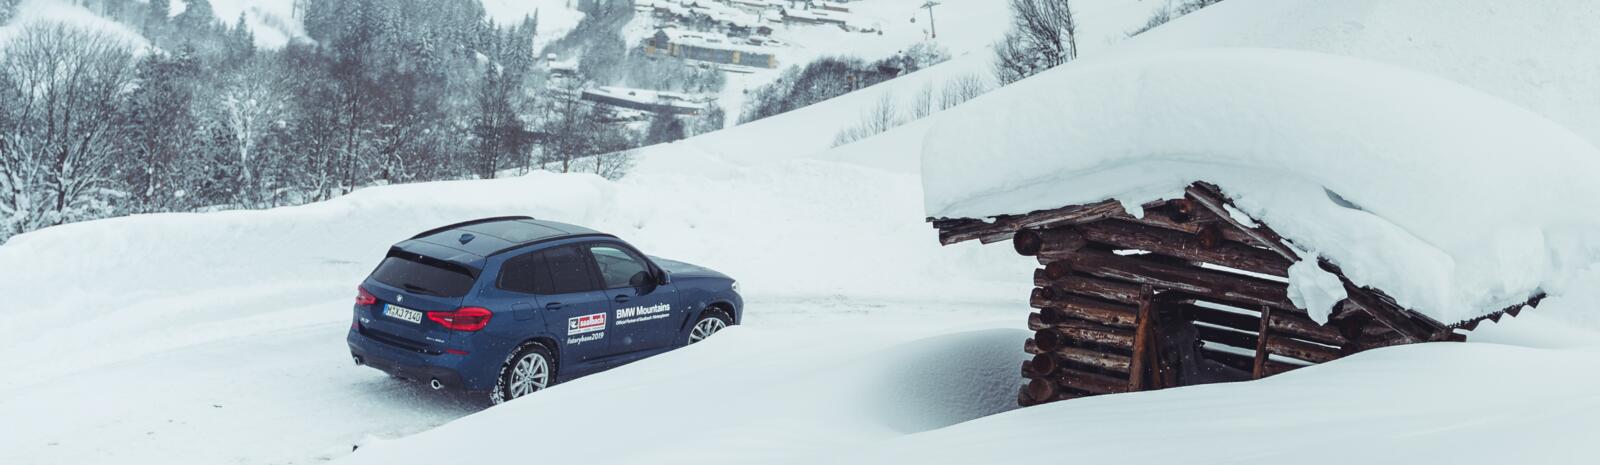 Arrival by car to the ski resort Saalbach Hinterglemm  | © Max Fortner